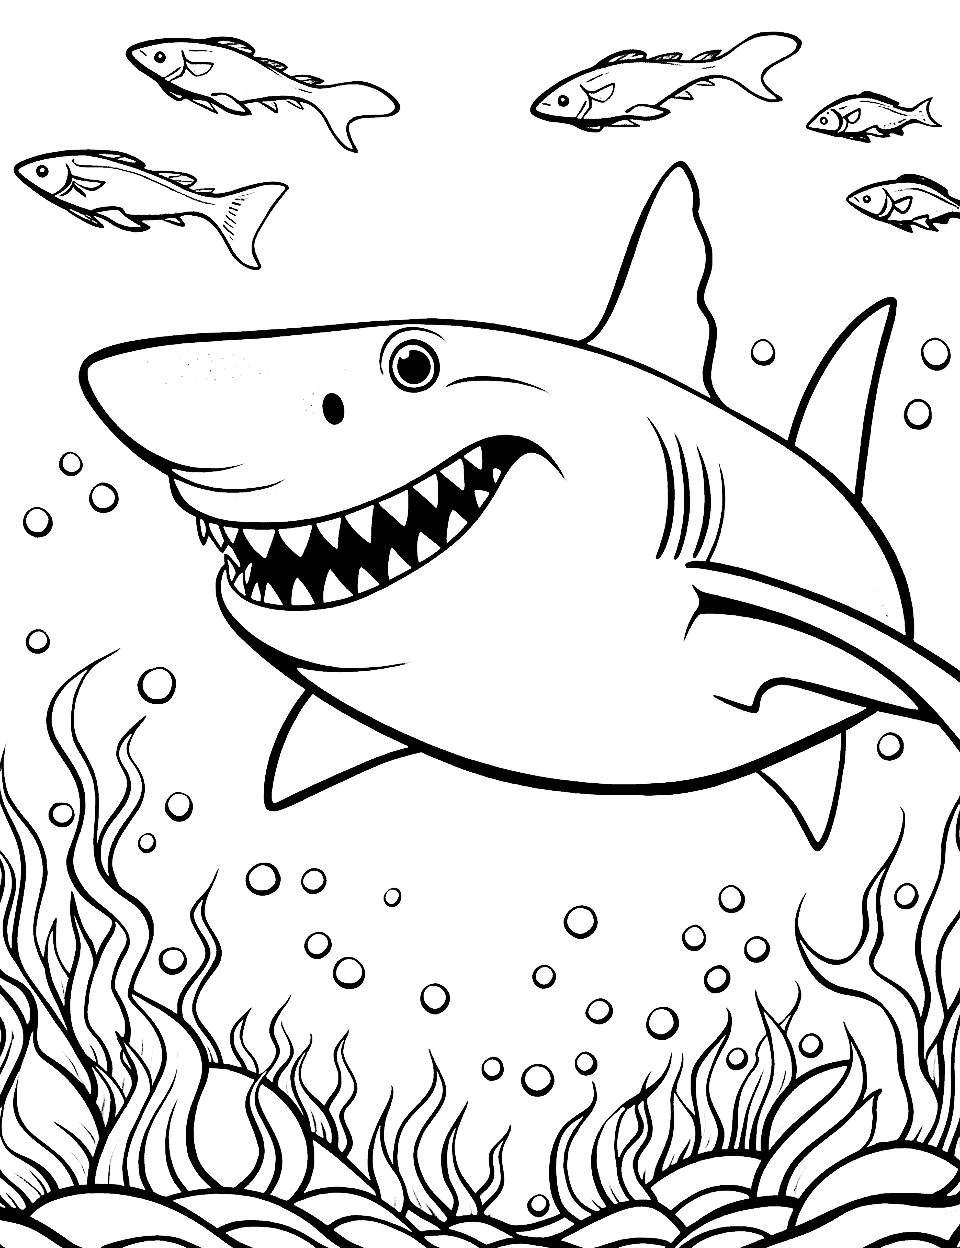 Shark Encounter Fish Coloring Page - A big shark, with a few tiny fish around, showcasing the predator and the prey.